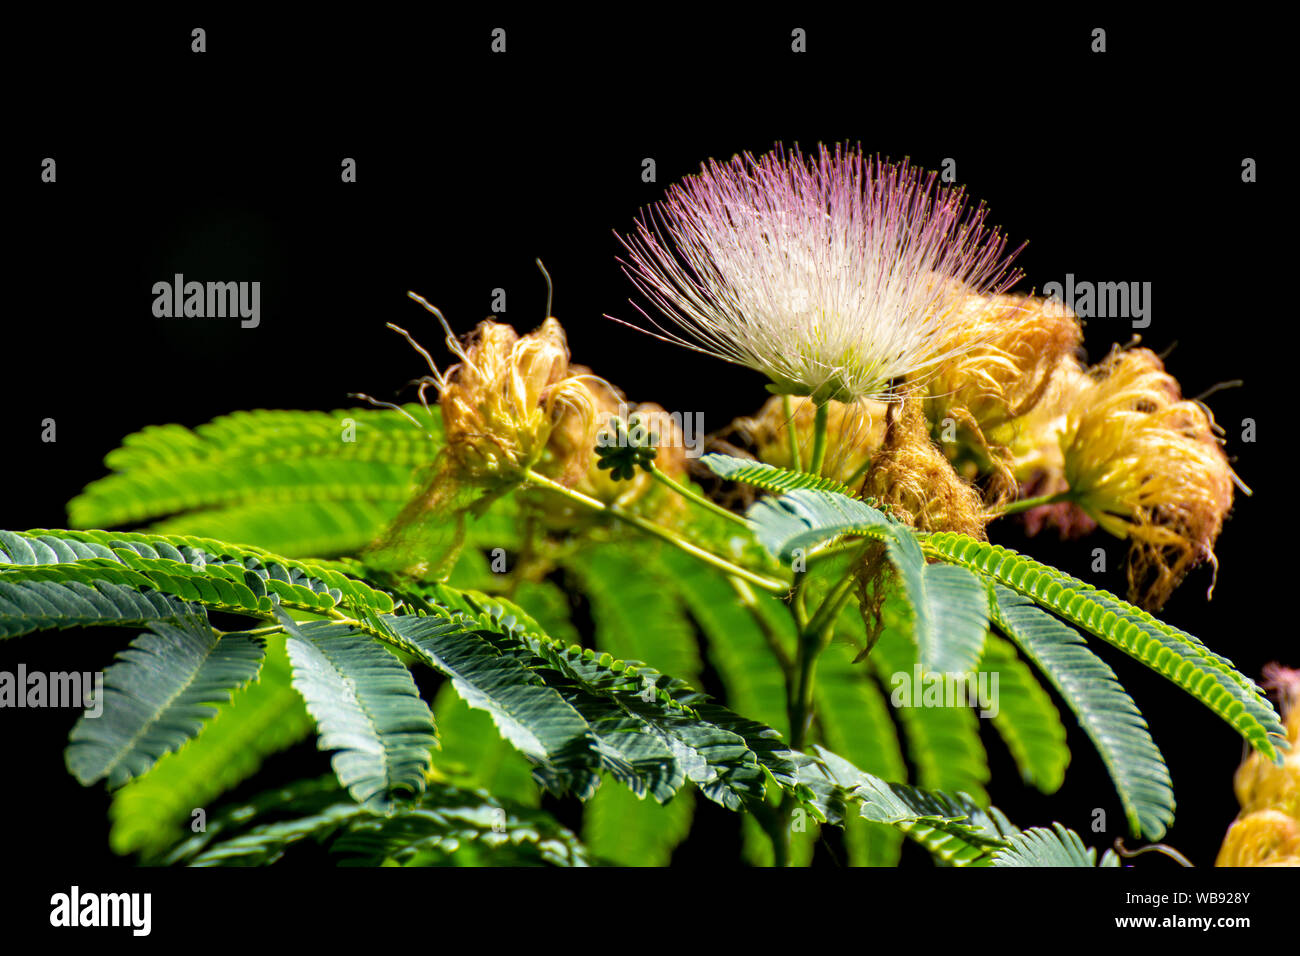 A close up of a flower of an Albizia julibrissin Stock Photo